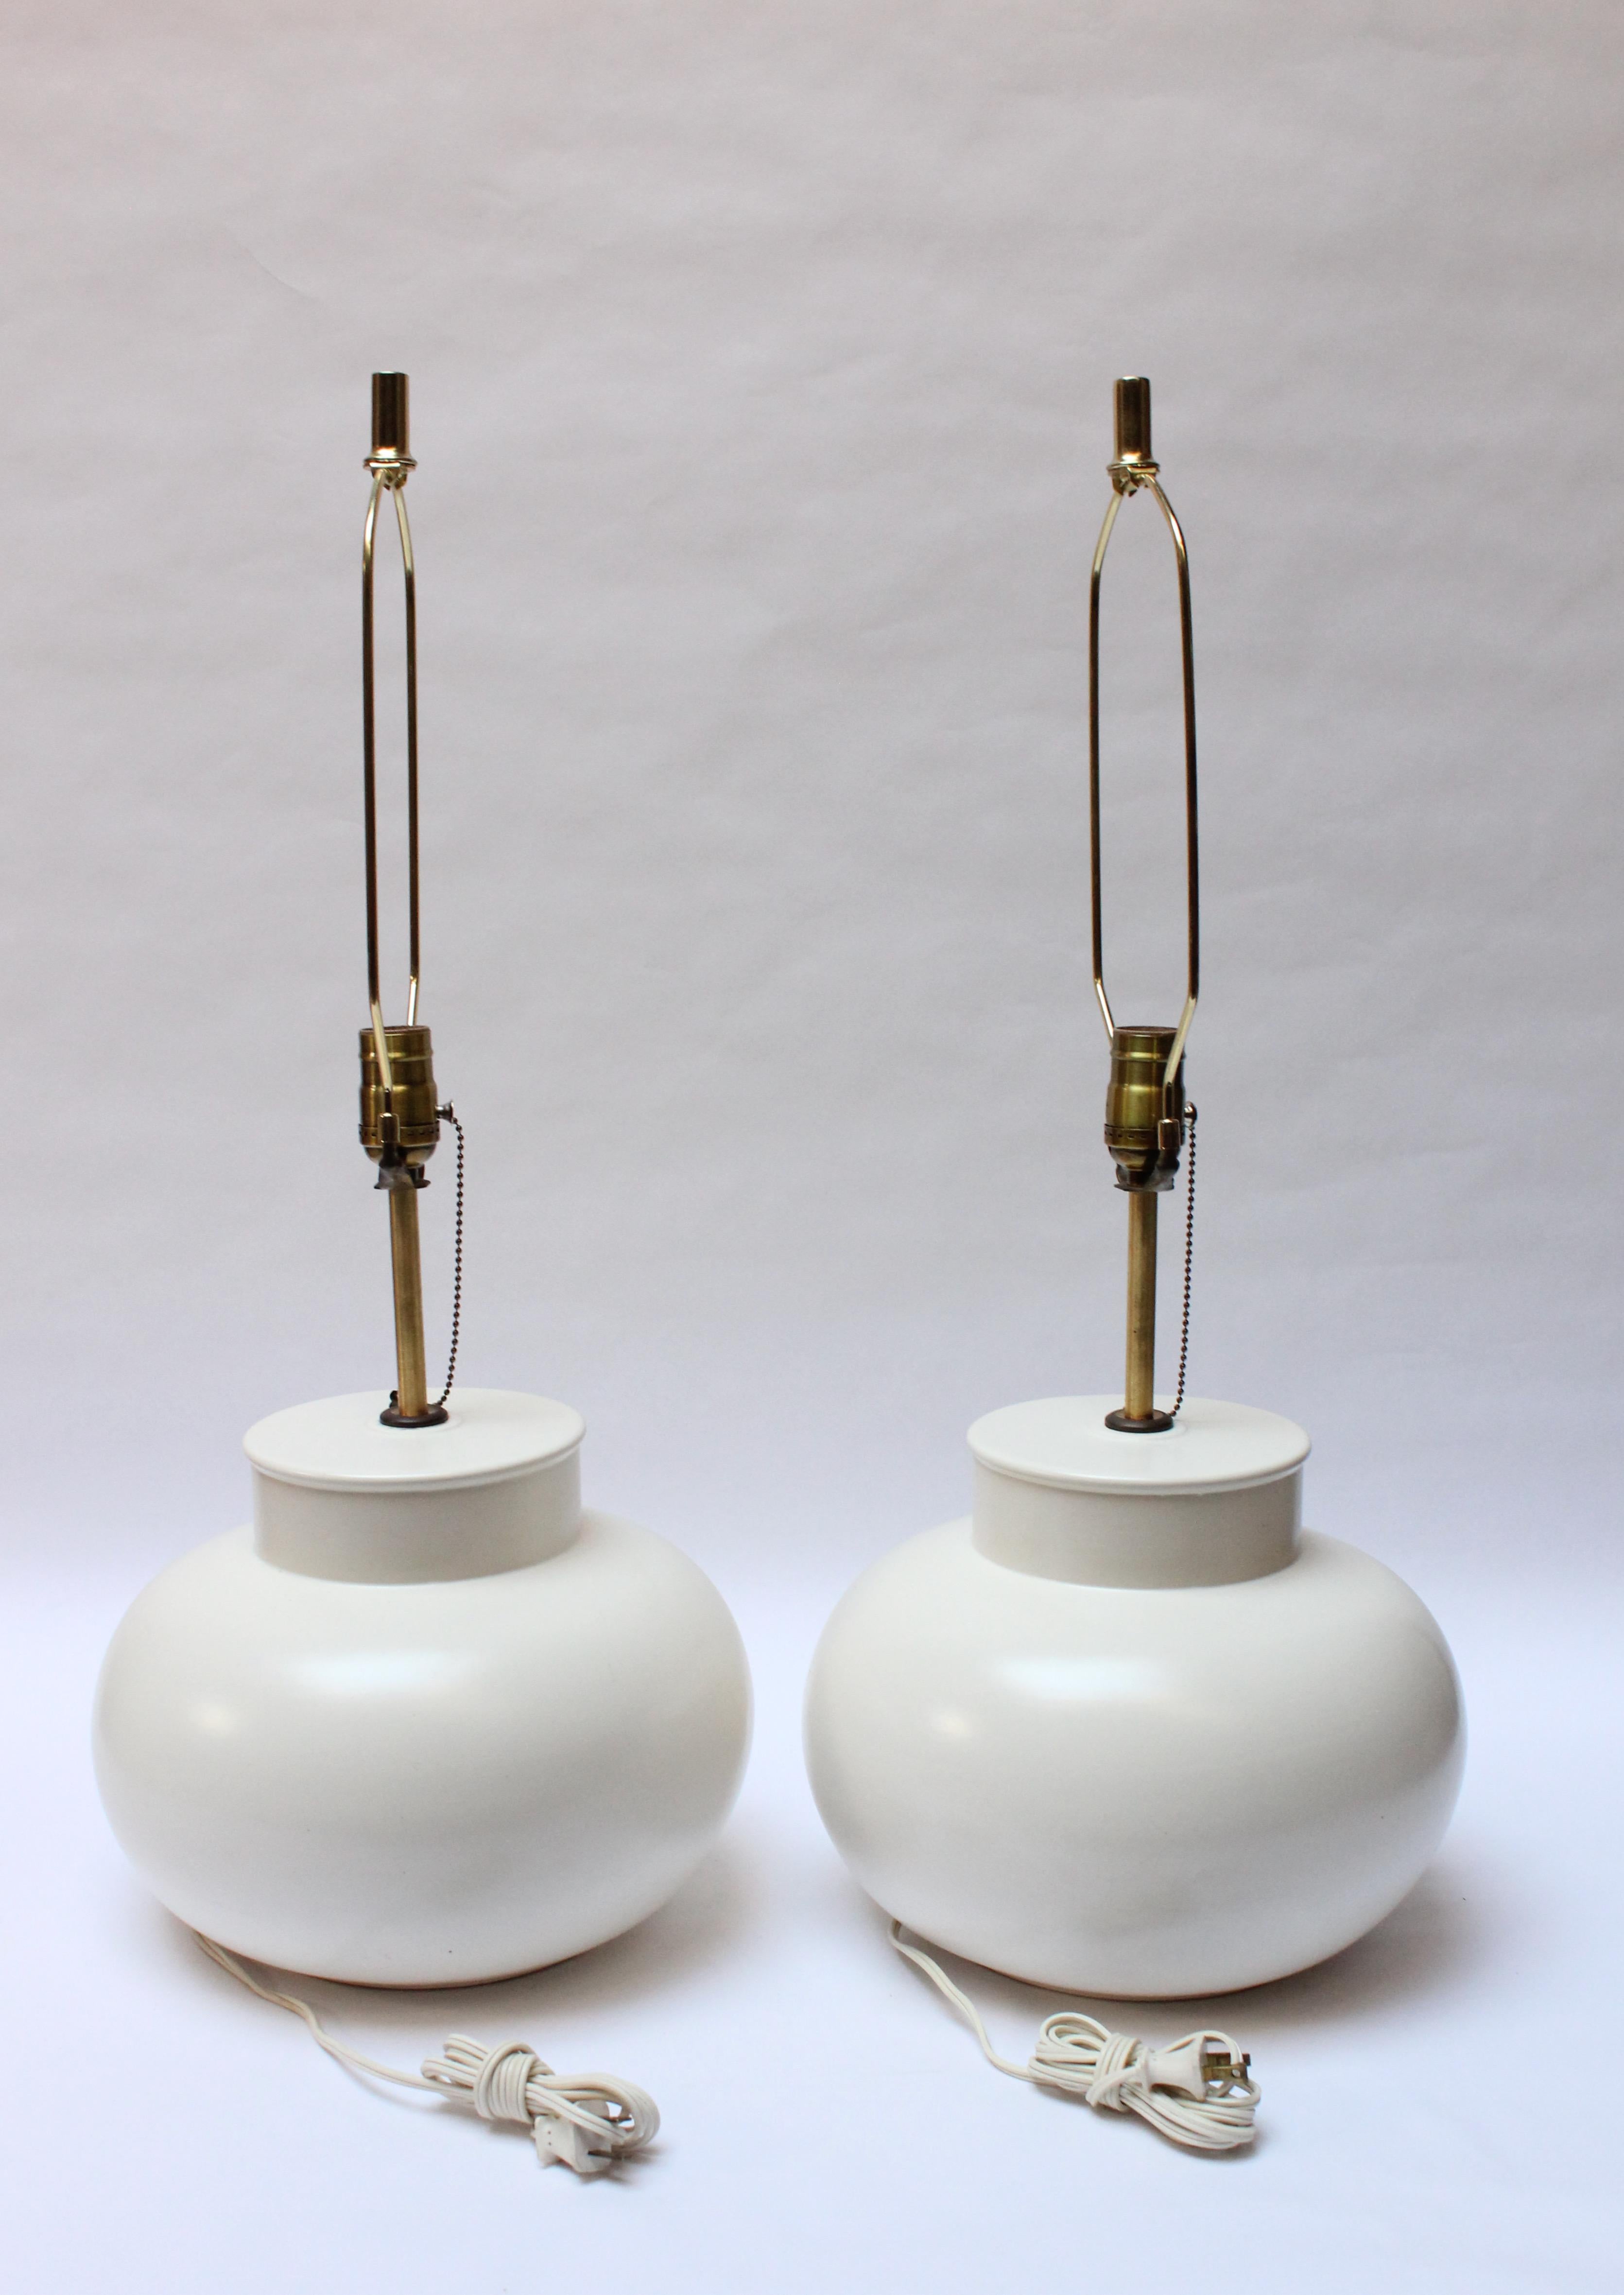 American Pair of Haeger Mid-Century Matte White Ceramic Table Lamps with Shades	